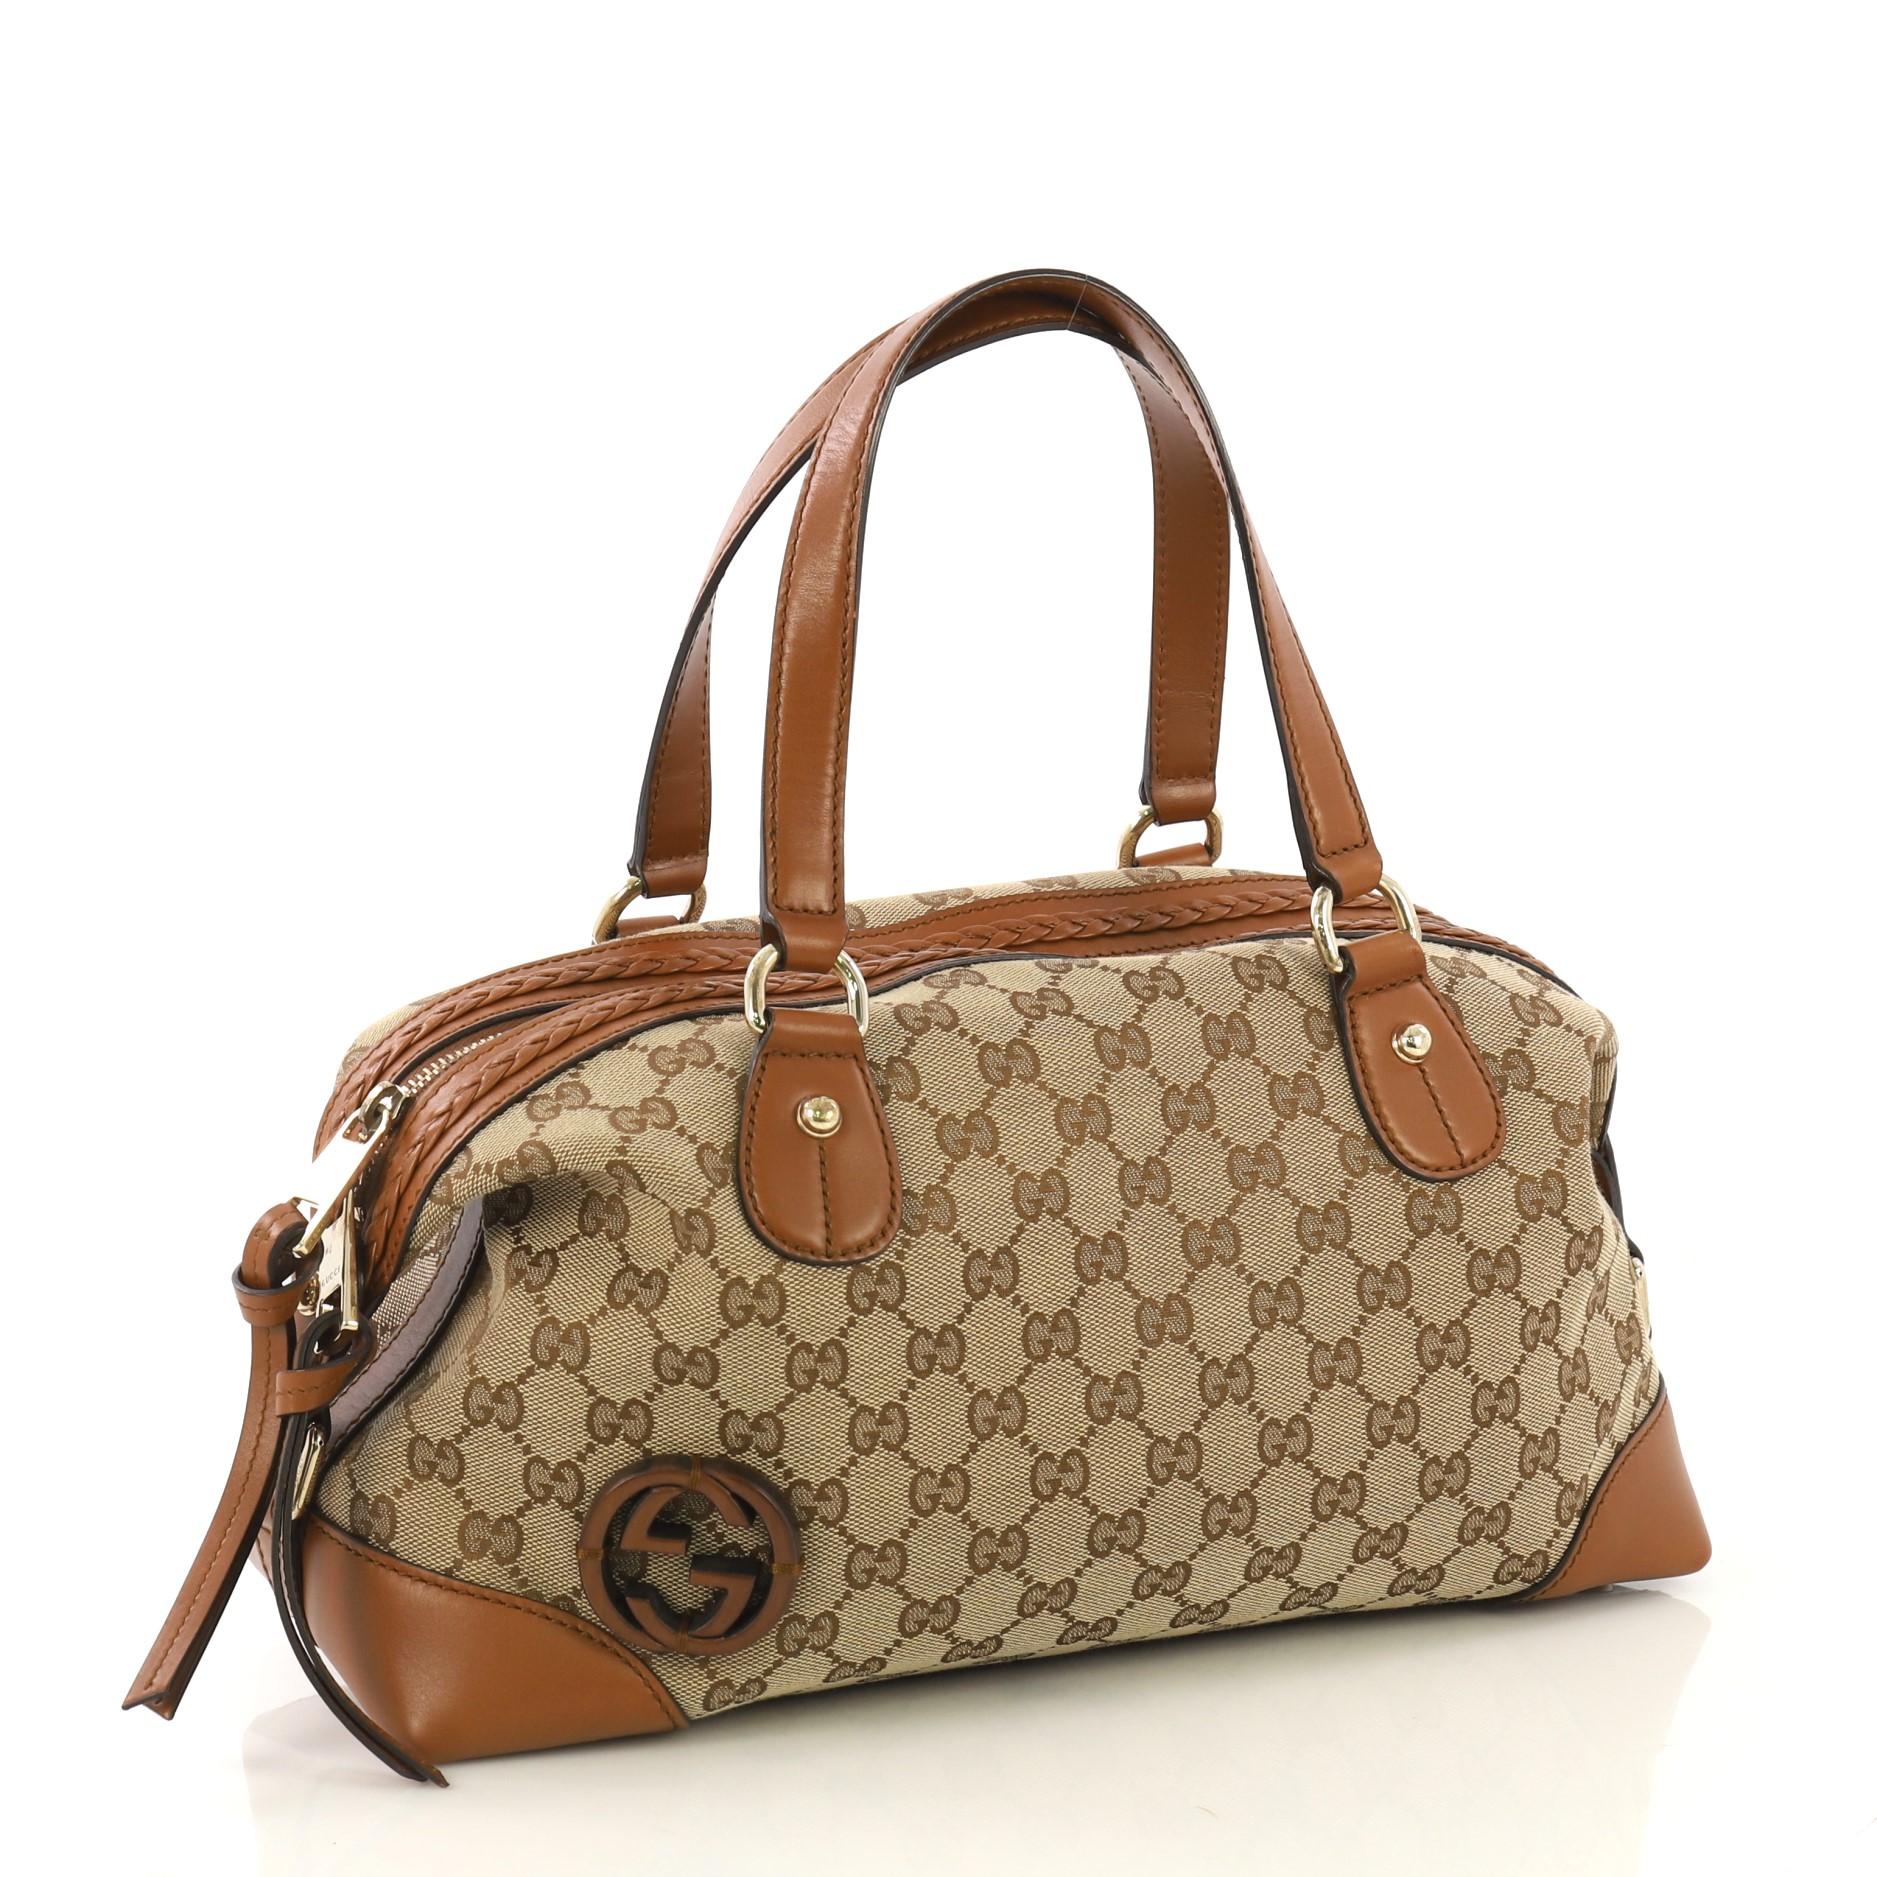 This Gucci Brick Lane Convertible Boston Bag GG Canvas Medium, crafted from beige canvas and brown leather, features dual leather handles, leather trim, and gold-tone hardware. Its zip closure opens to a beige fabric interior with side zip and slip